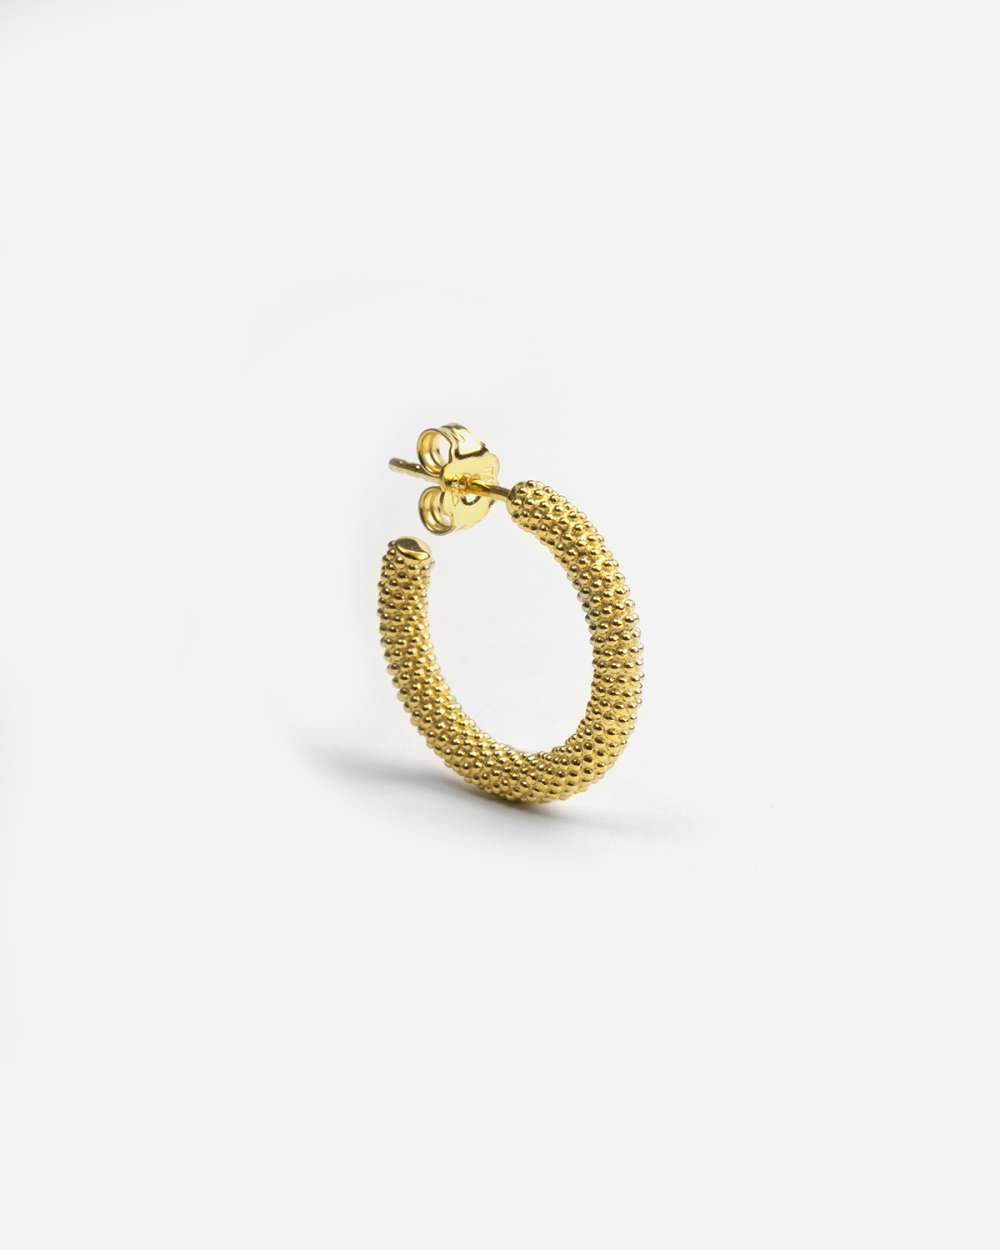 DOTTED MEDIUM HOOP SINGLE EARRING / POLISHED YELLOW GOLD